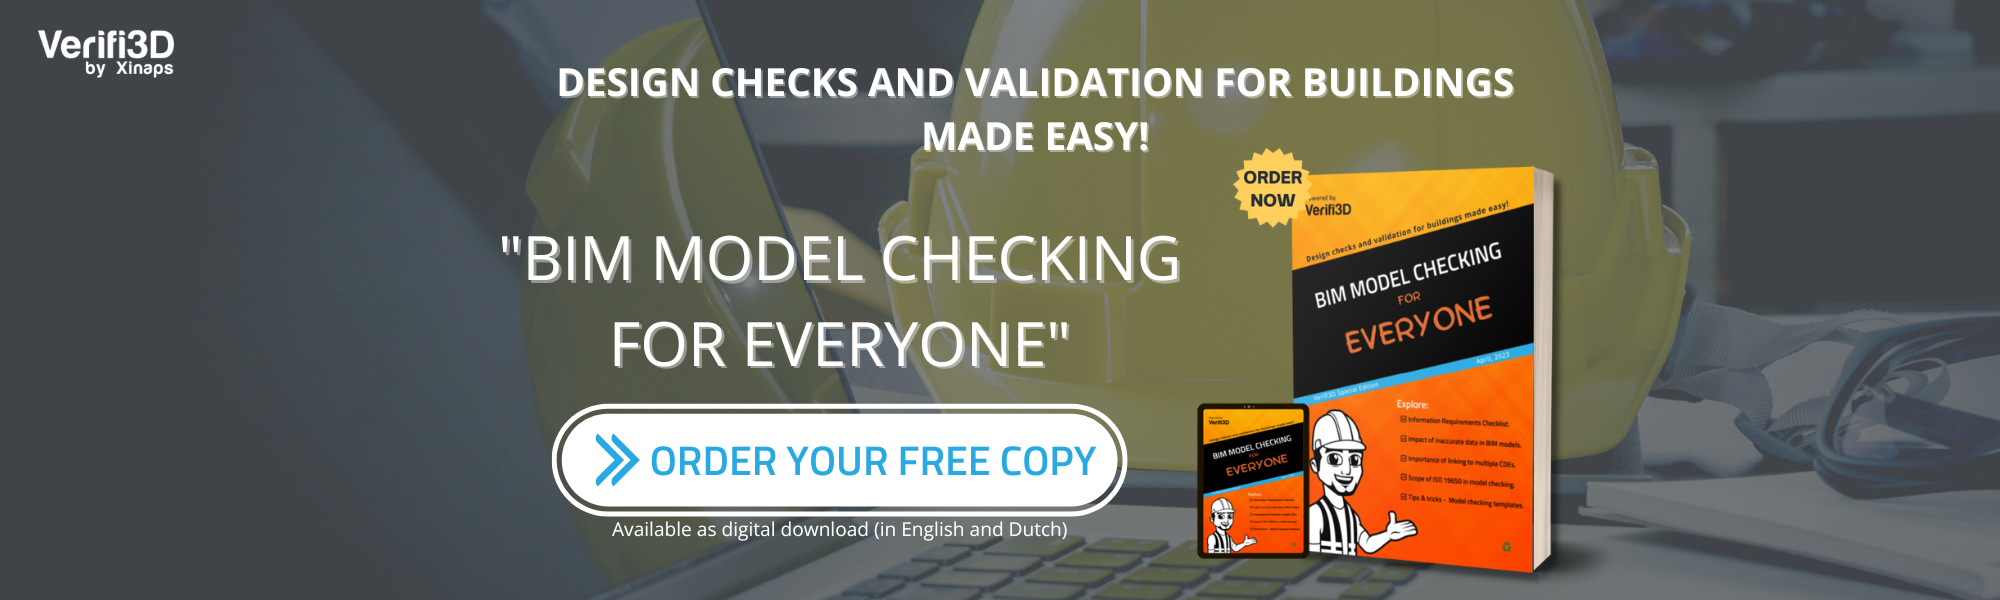 BIM MODEL CHECKING FOR EVERYONE - ORDER NOW